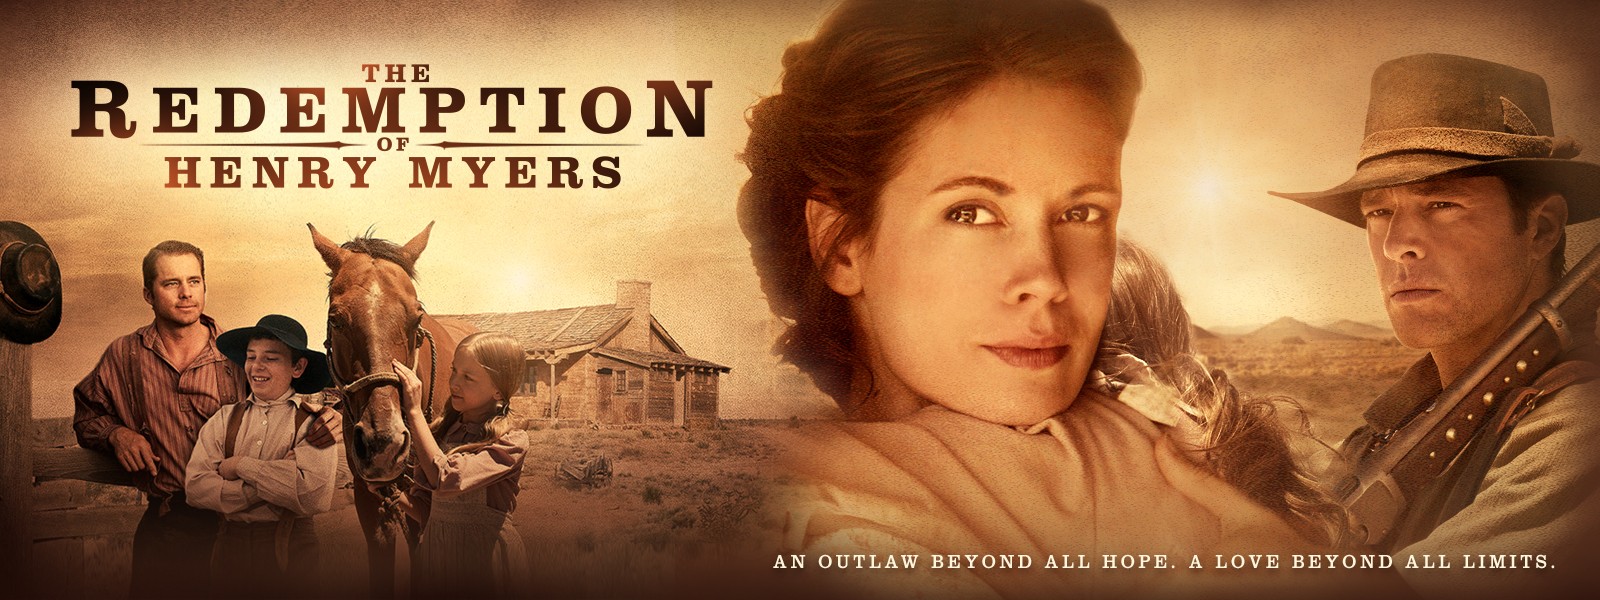 Redemption of Henry Myers - Christian Movie.jpg